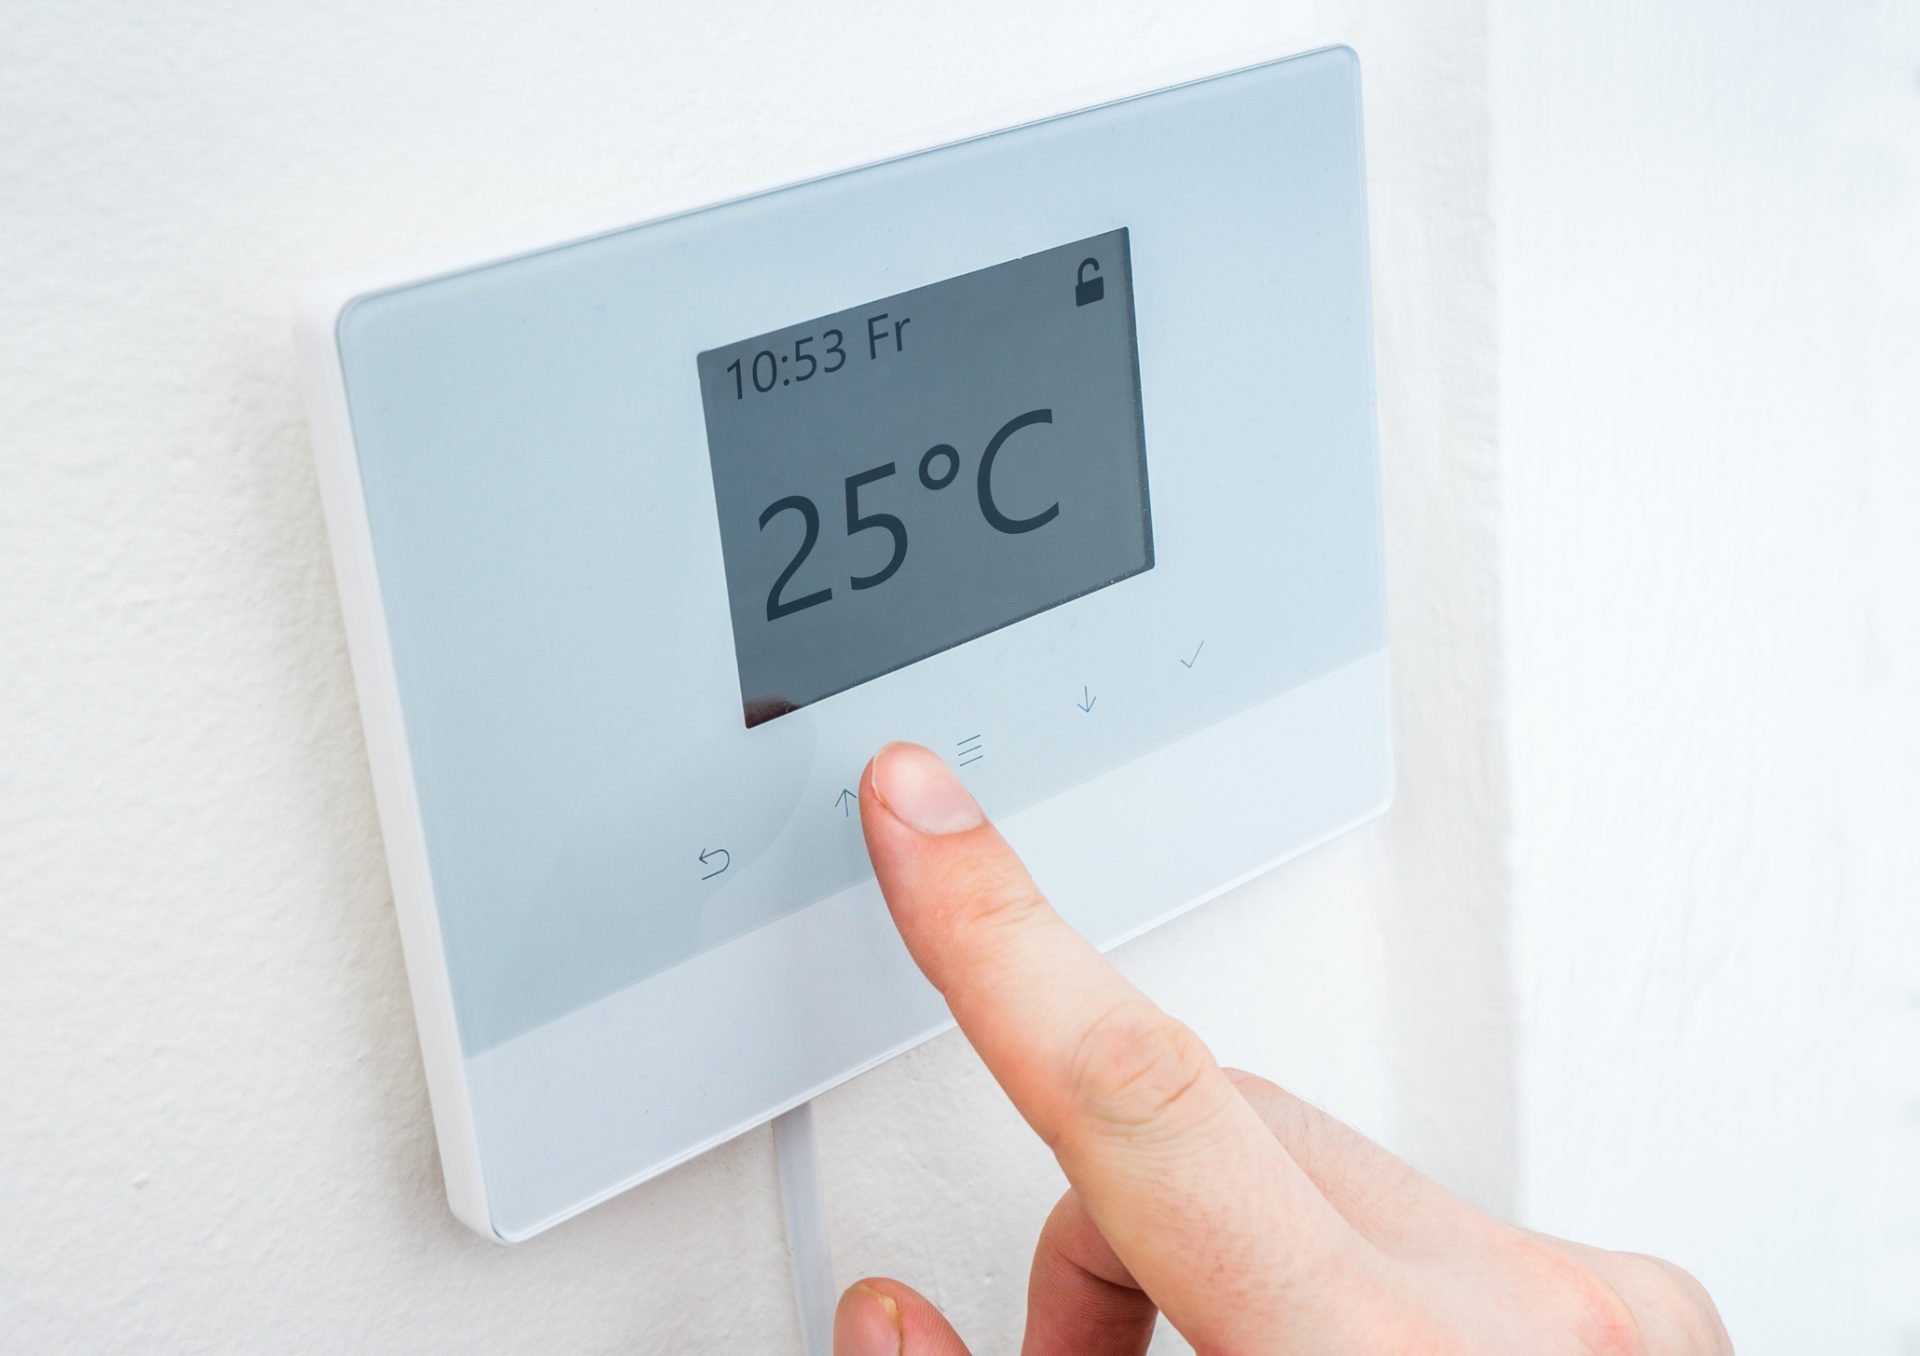 Increasing room temperature using a thermostat